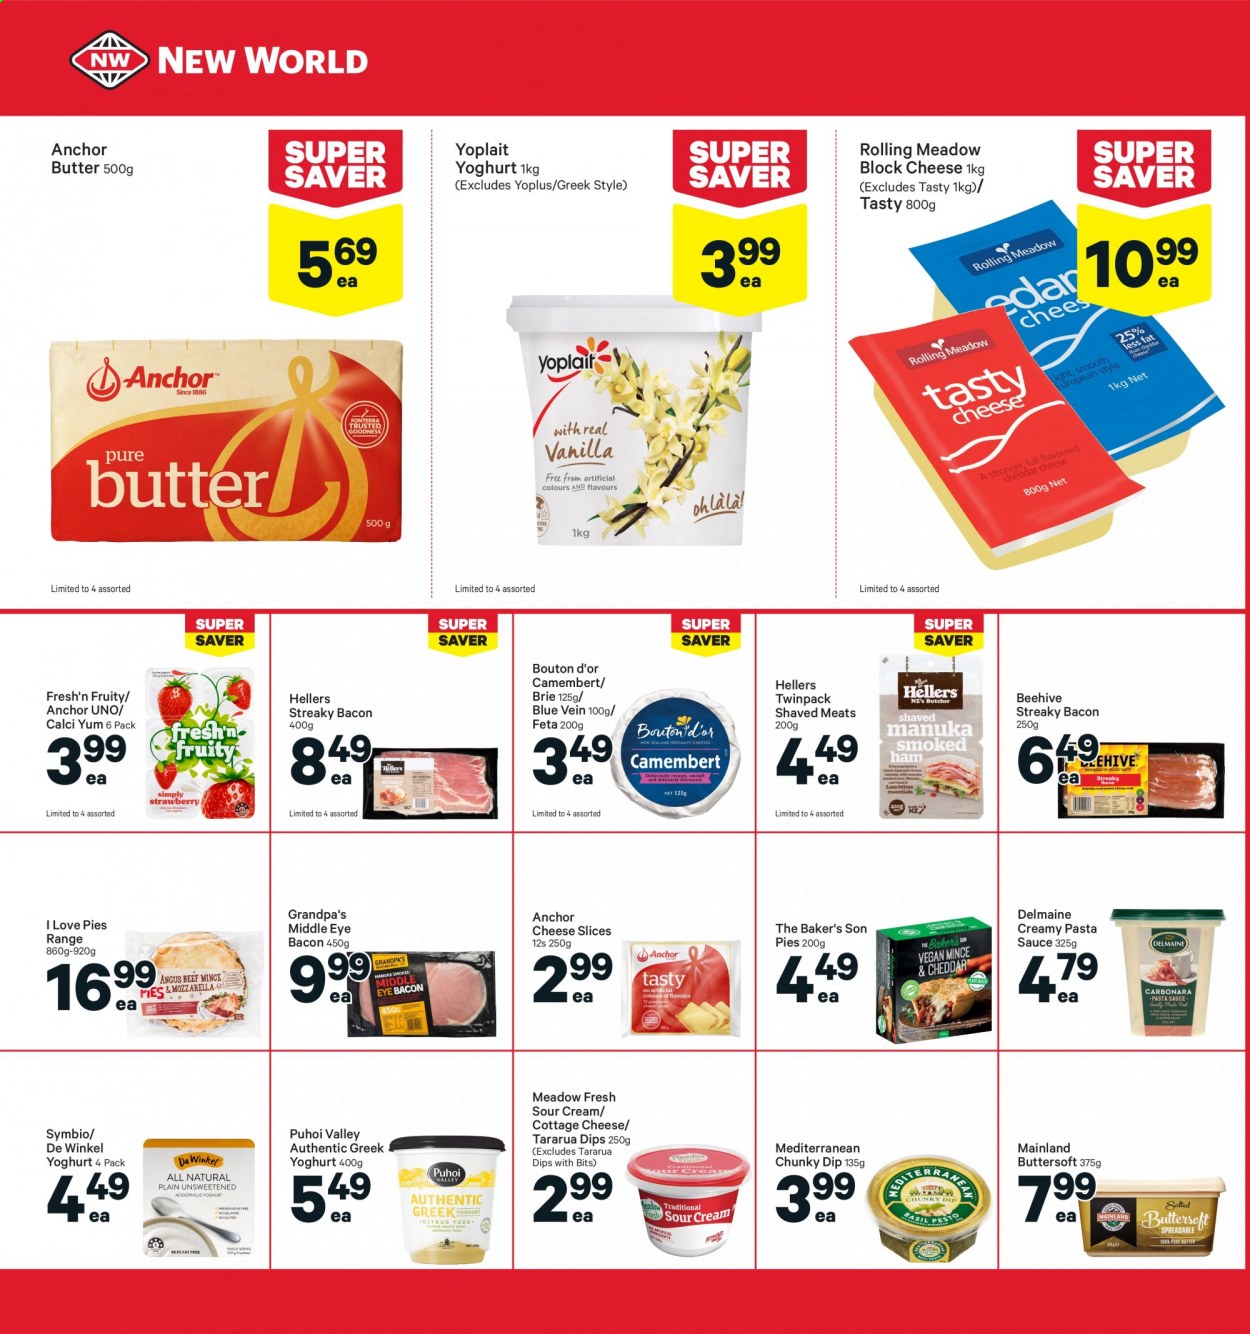 thumbnail - New World mailer - 05.07.2021 - 11.07.2021 - Sales products - pasta sauce, sauce, Delmaine, bacon, streaky bacon, camembert, cottage cheese, sliced cheese, cheese, brie, feta, greek yoghurt, yoghurt, Fresh'n Fruity, Yoplait, butter, Anchor, sour cream, dip. Page 20.